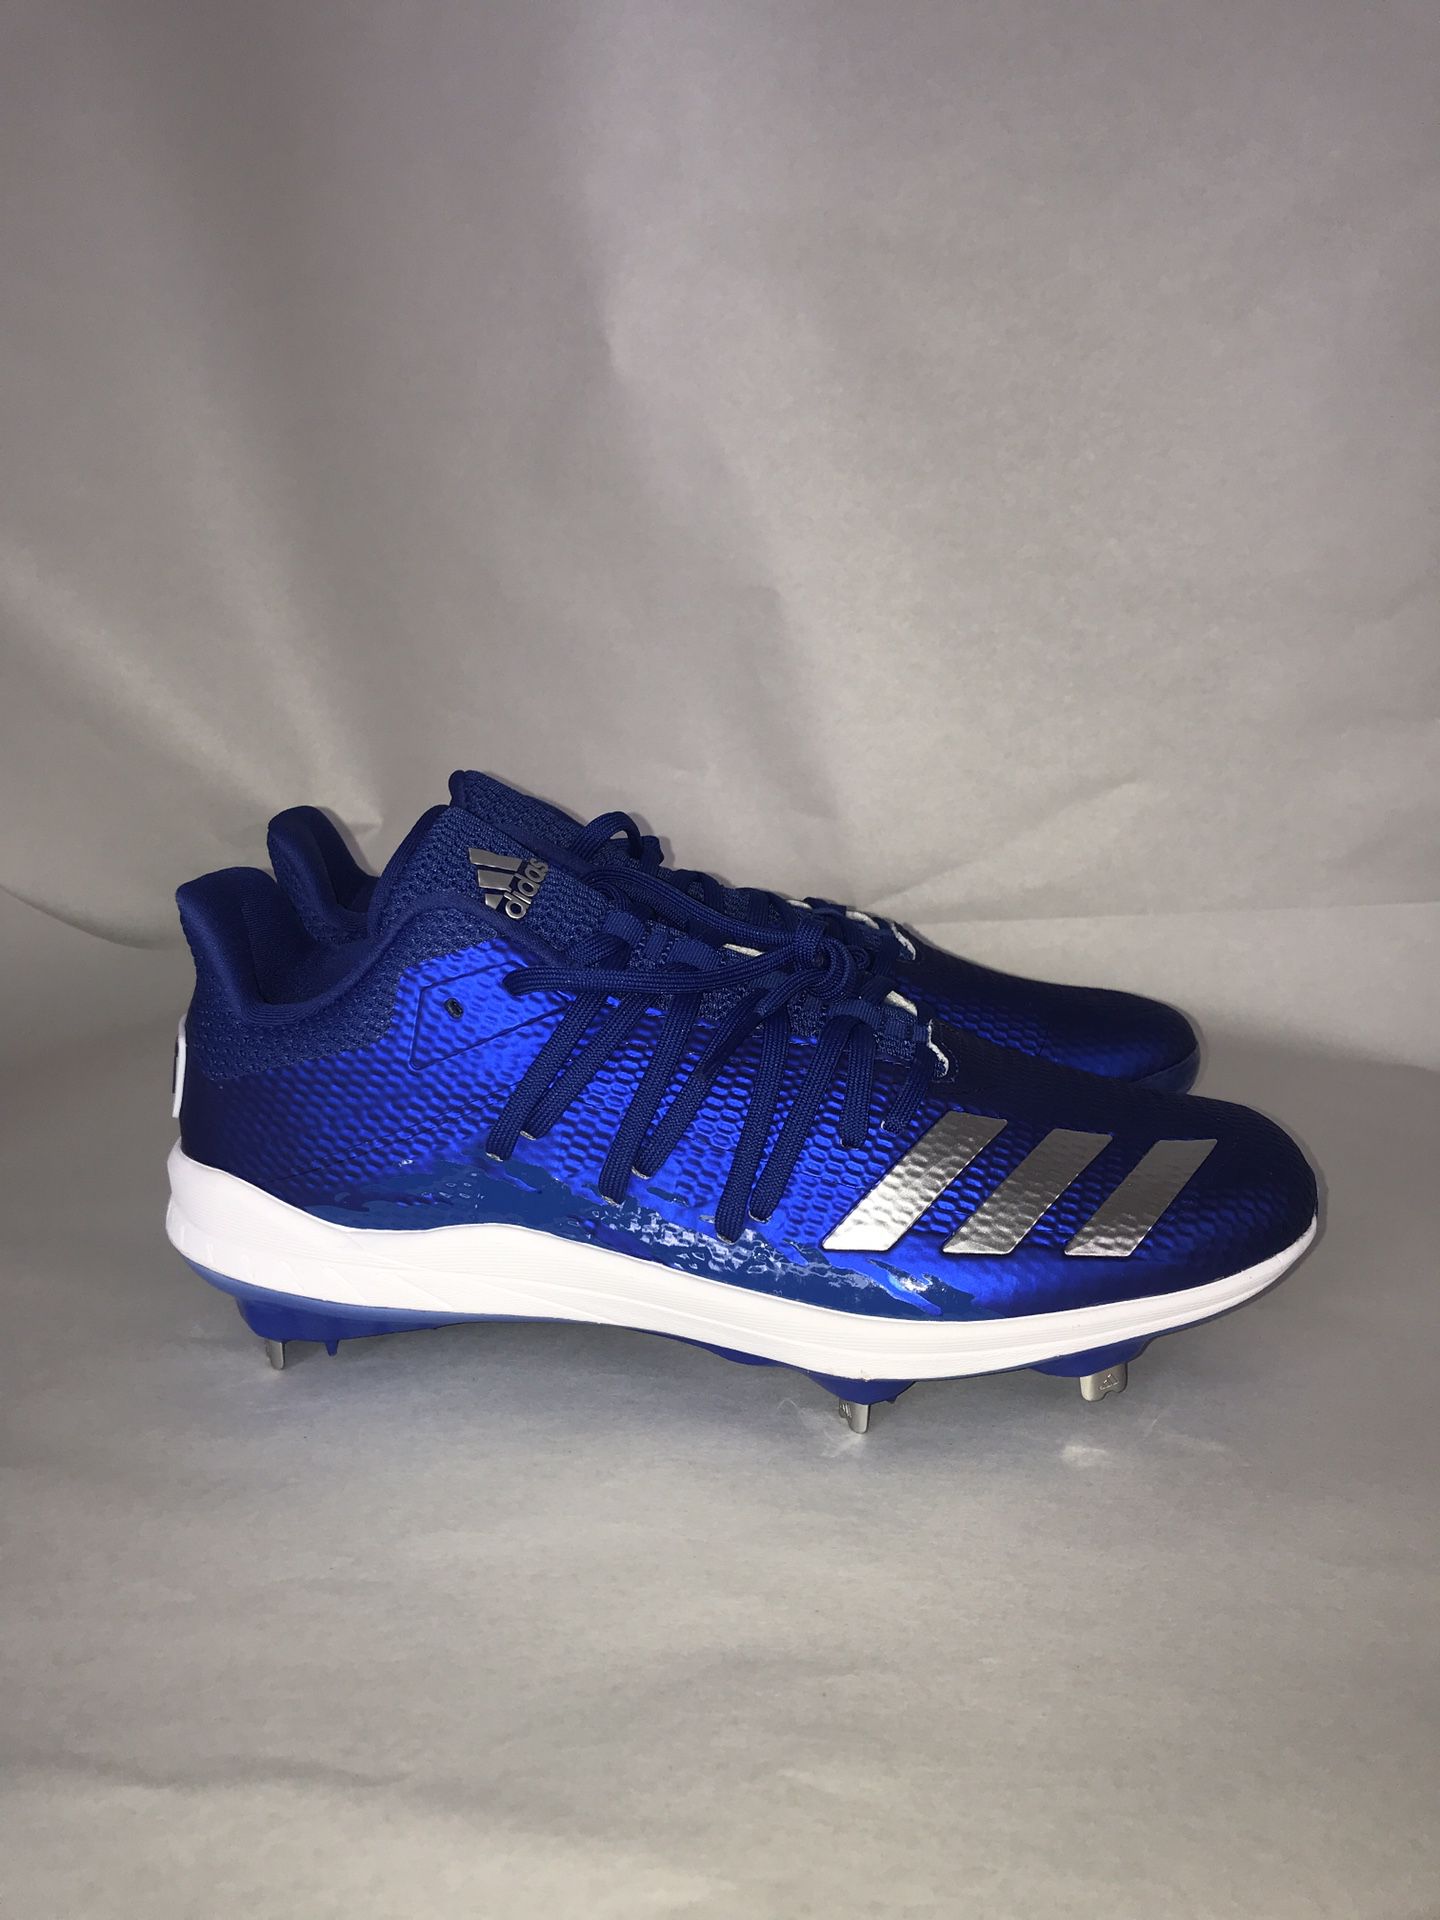 NEW Adidas Afterburner 6 Speed Men's Metal Baseball Cleats Blue G27656 Size 10.5 New without box 